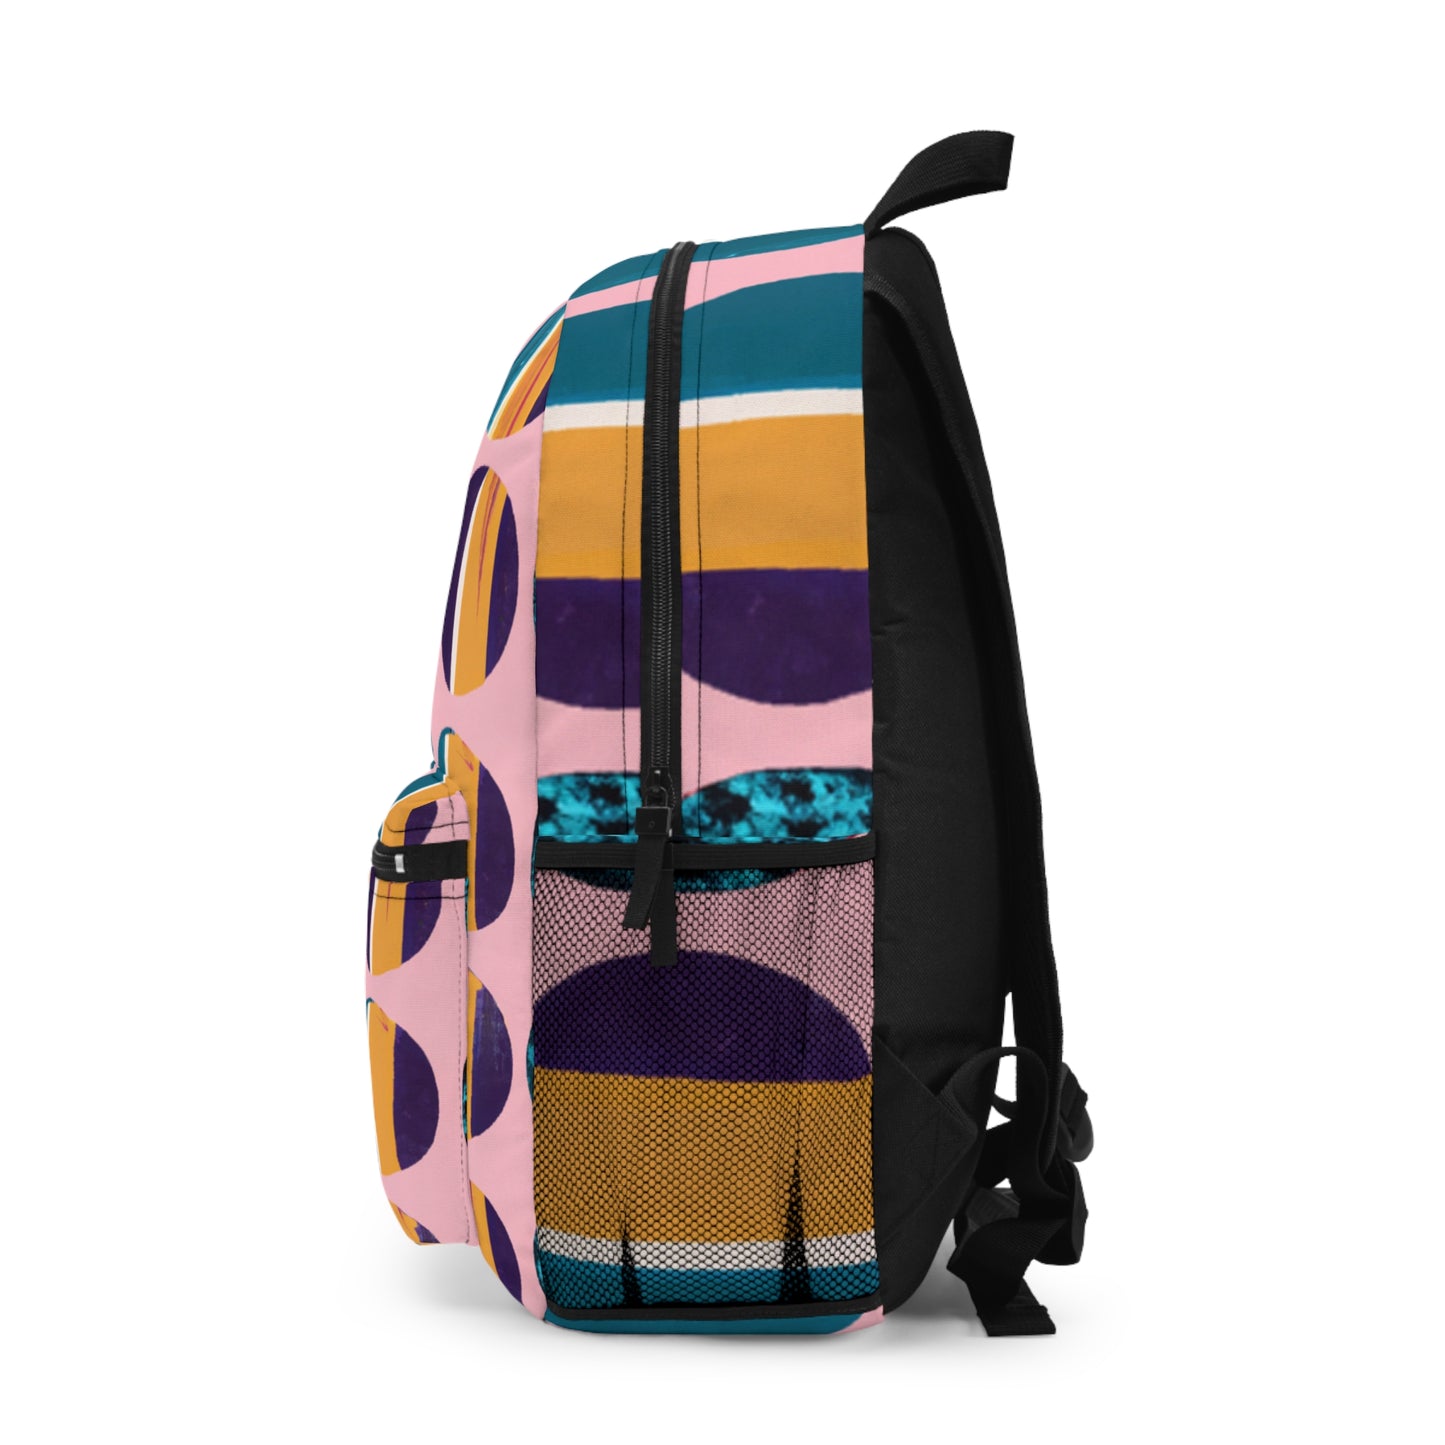 Alexis Galvin Backpack